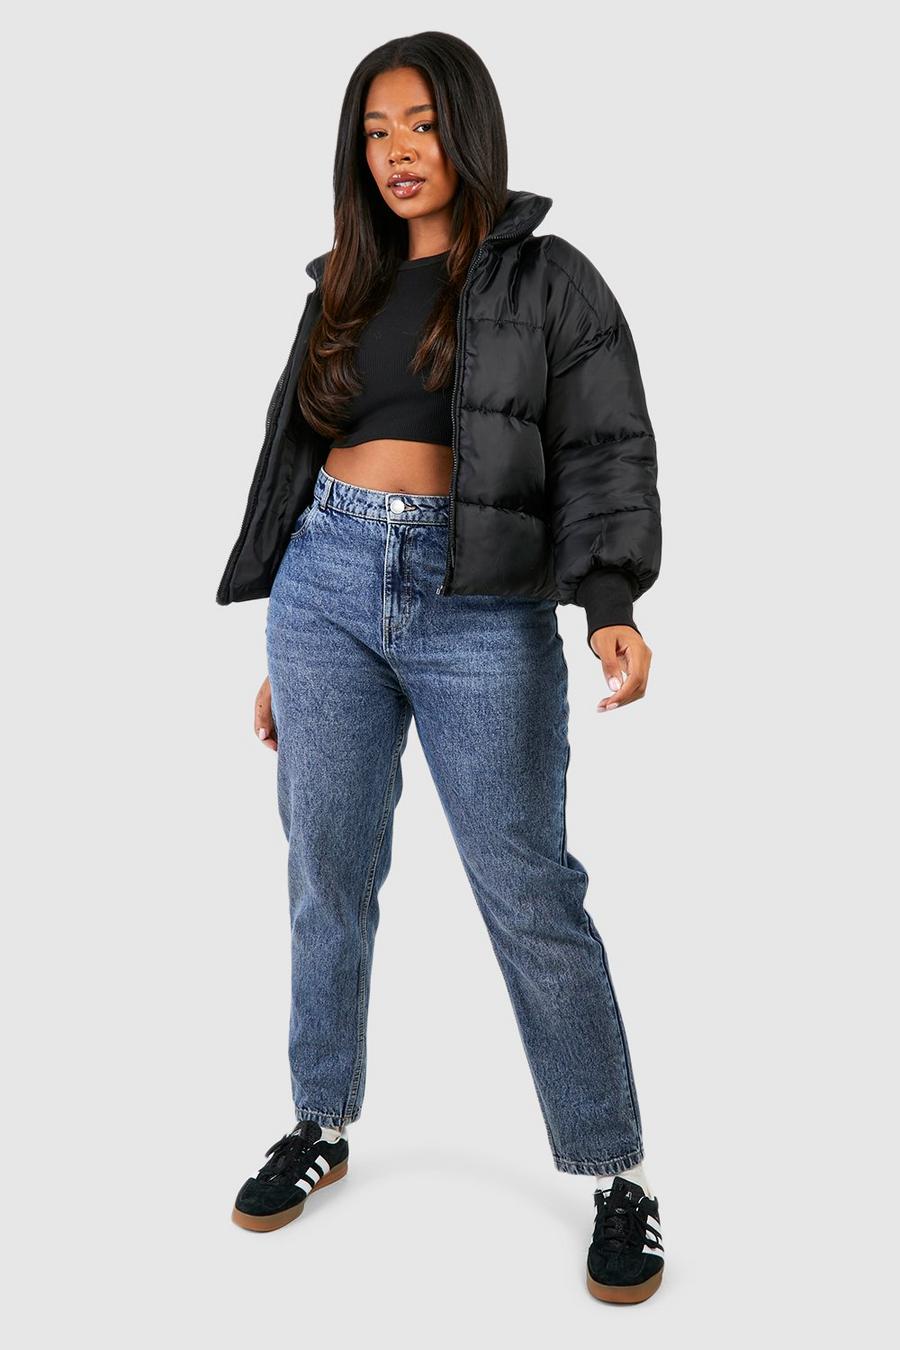 Mom Jeans #baggy #clothes #outfit #plus #size